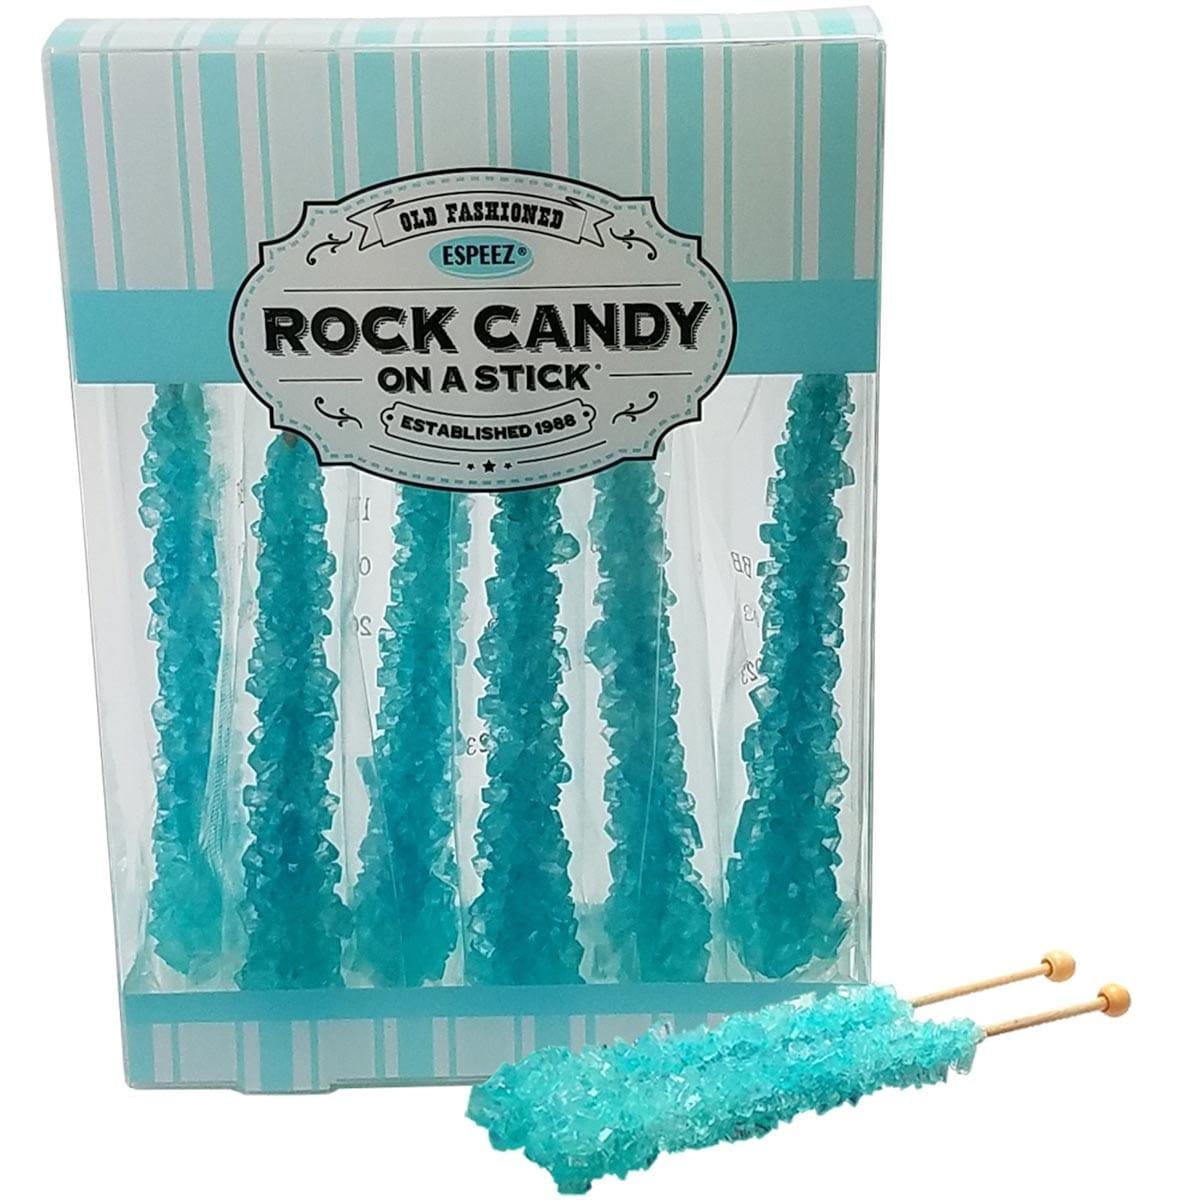 Buy Candy Light Blue Rock Candy On Stick, 6 Count sold at Party Expert